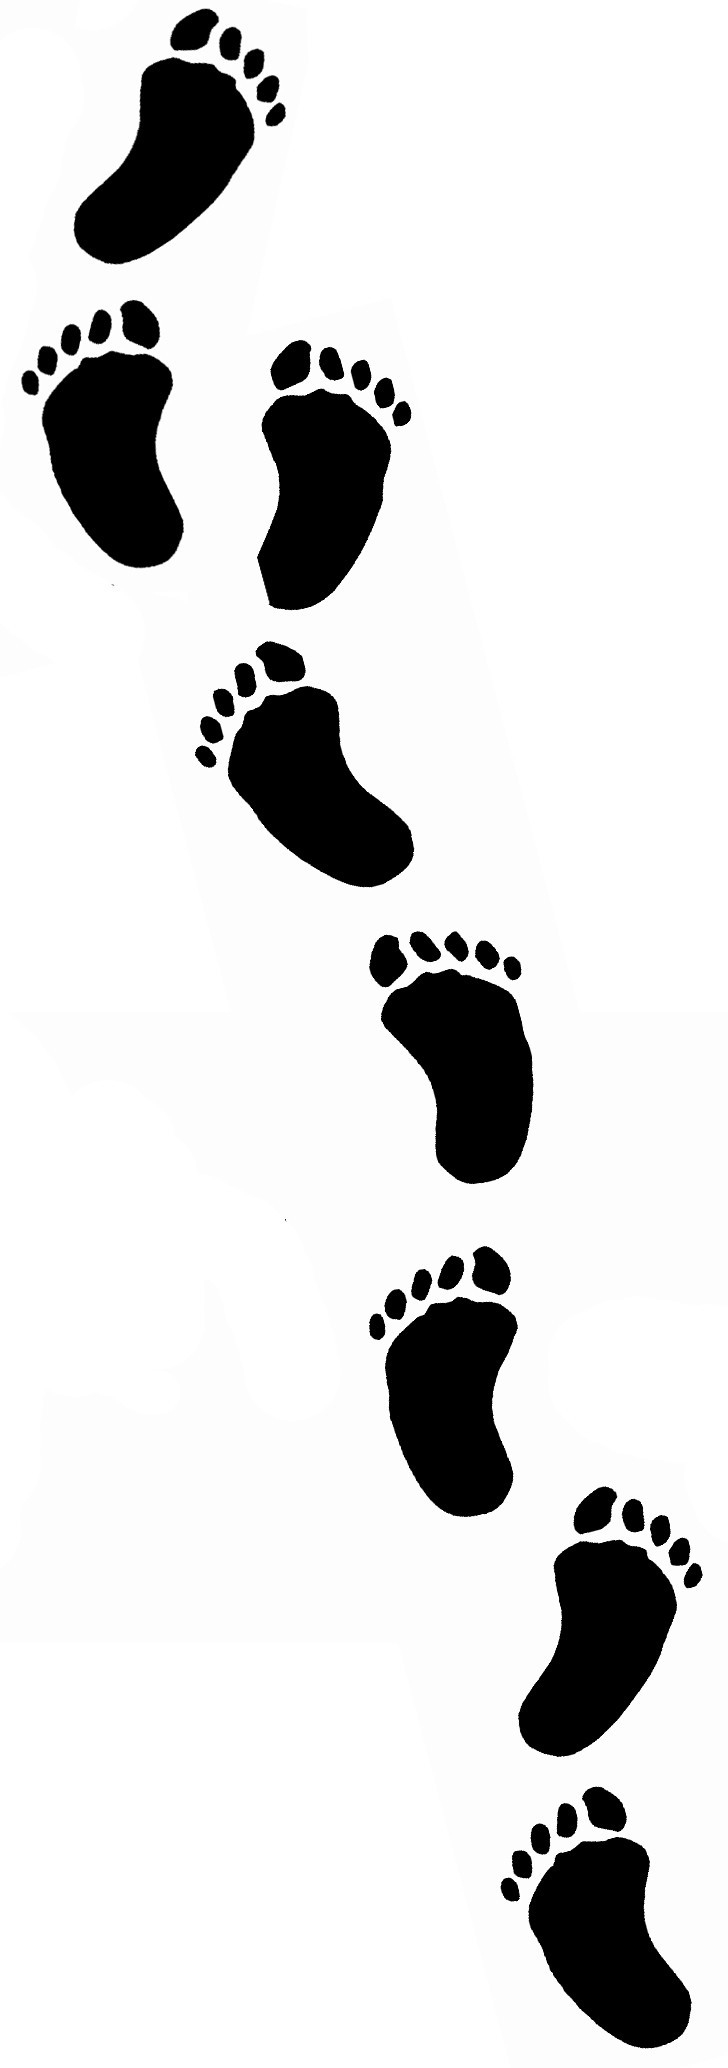 Footprints clipart black and white - ClipartFox